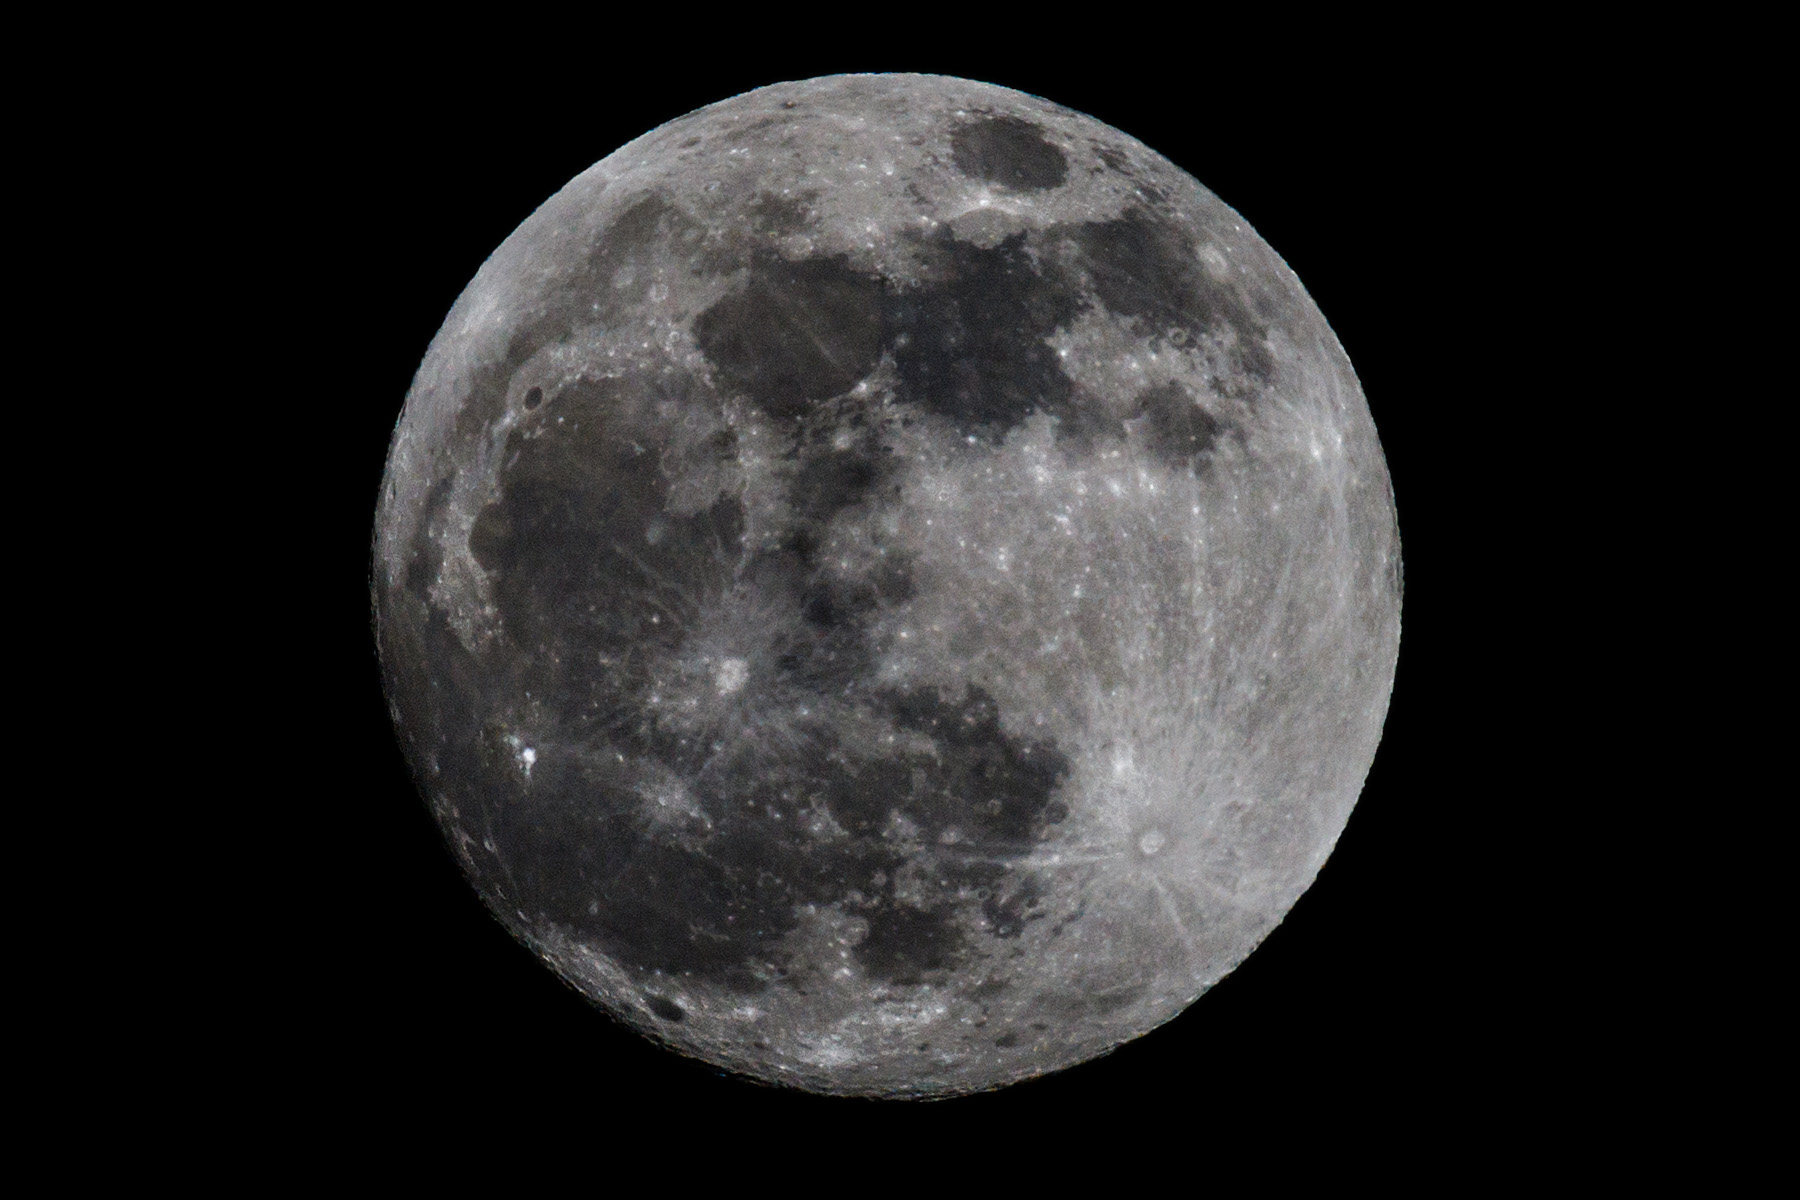 May as well finish off this album with a shot of the full moon.  6D, 500mm, 1.4x extender.  Click for next photo.